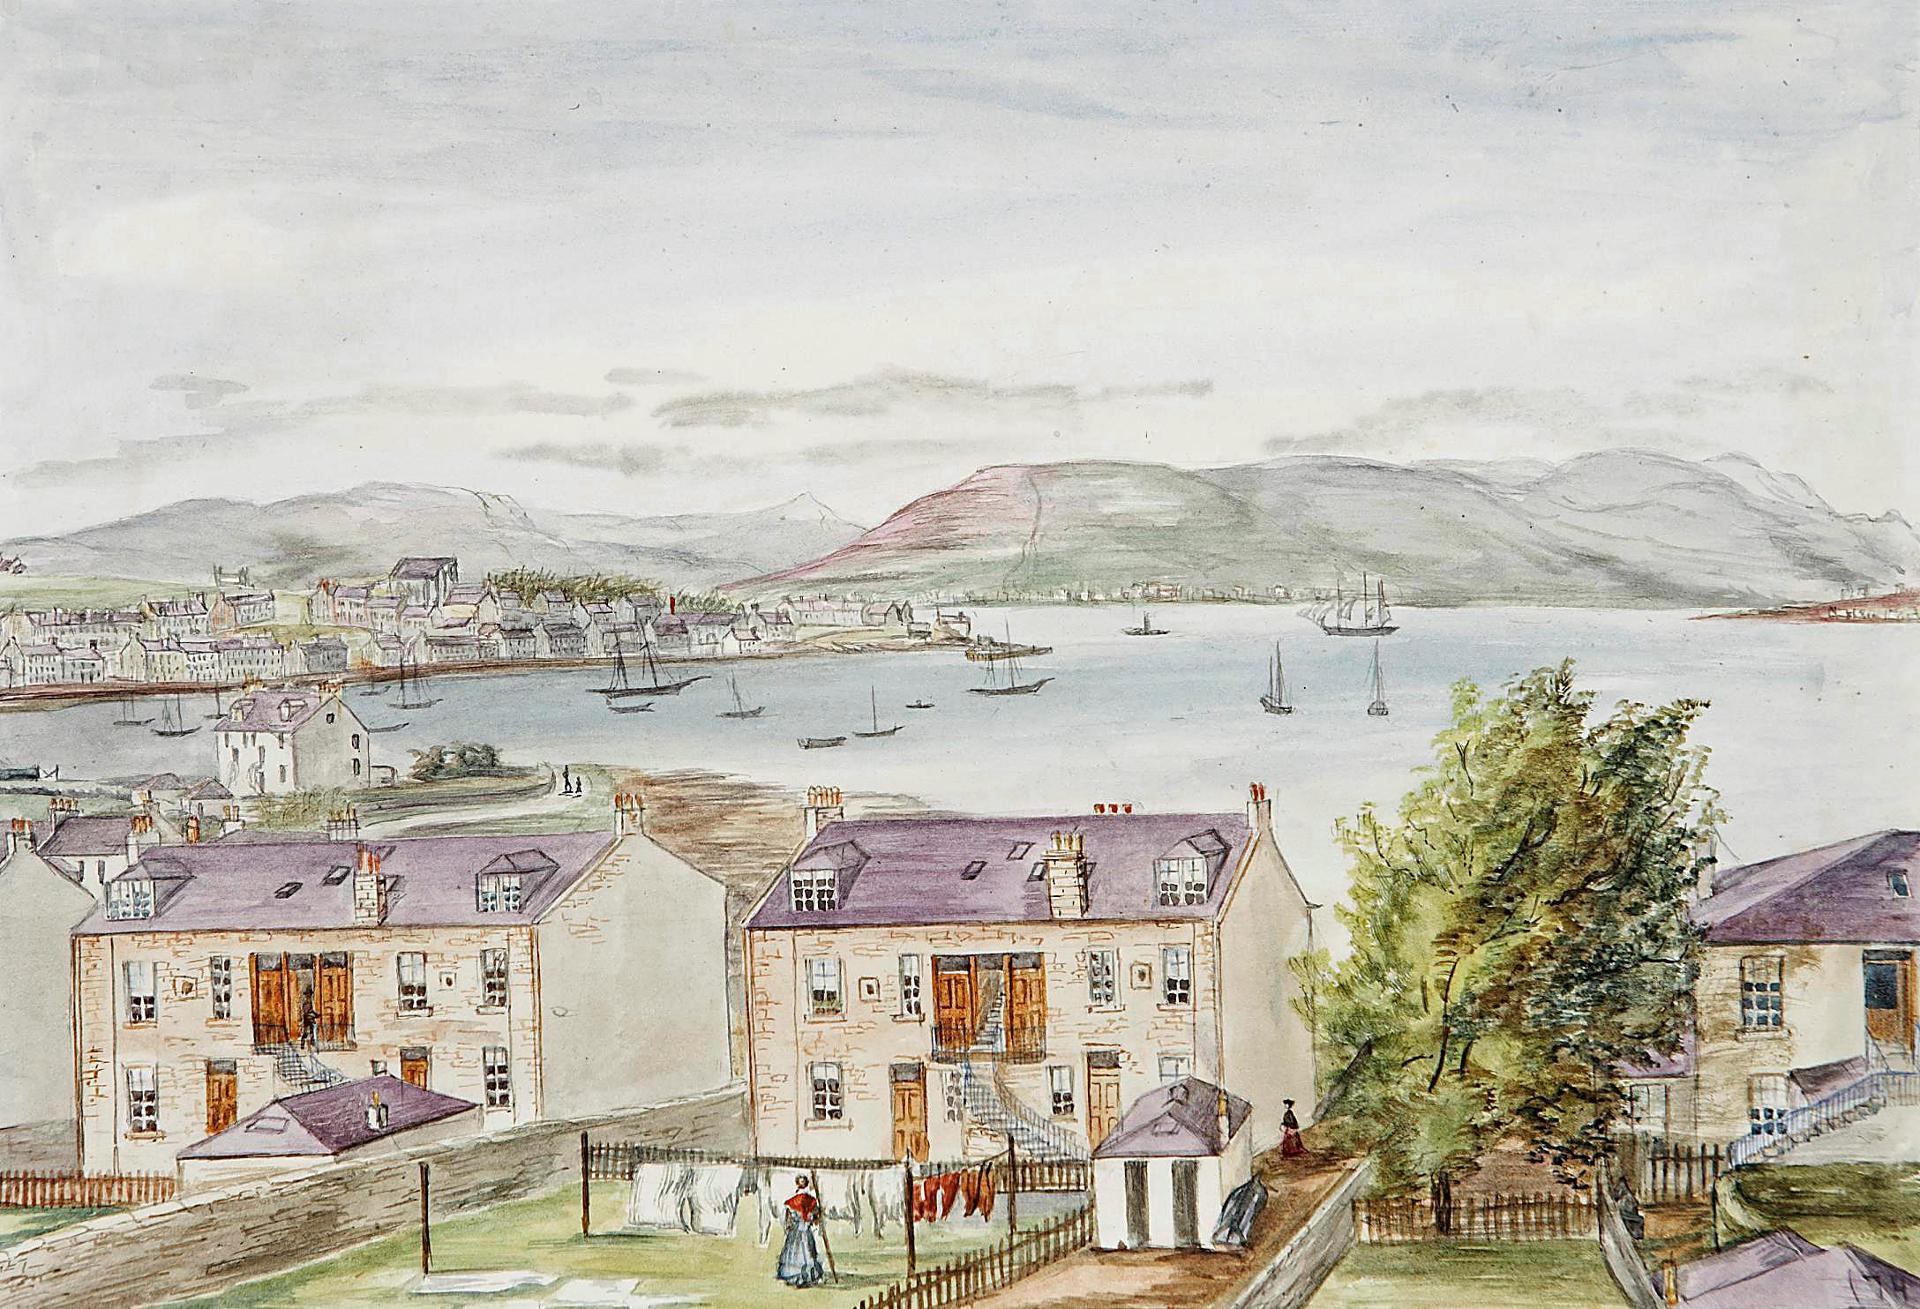 H. Gardner - A cloth bound album of 39 views painted between 1871 and 1874 showing different scenes mainly in Scotland.